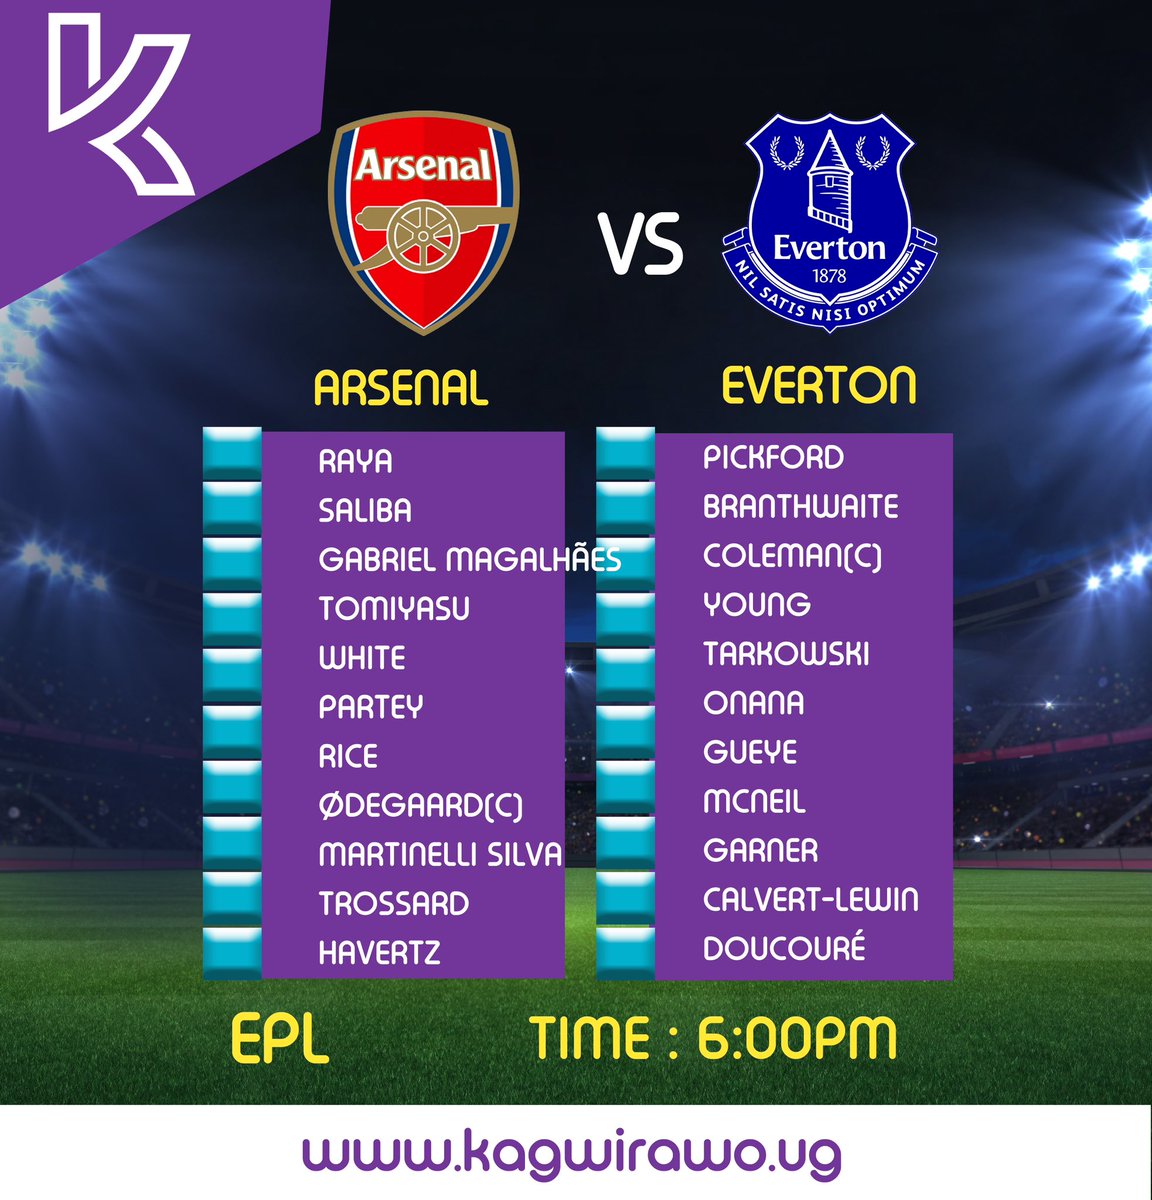 Bukayo Saka is NOT included in Arsenal's squad for their must-win game vs. Everton Bet via kagwirawo.ug #KagwirawoUpdates | #ARSEVE